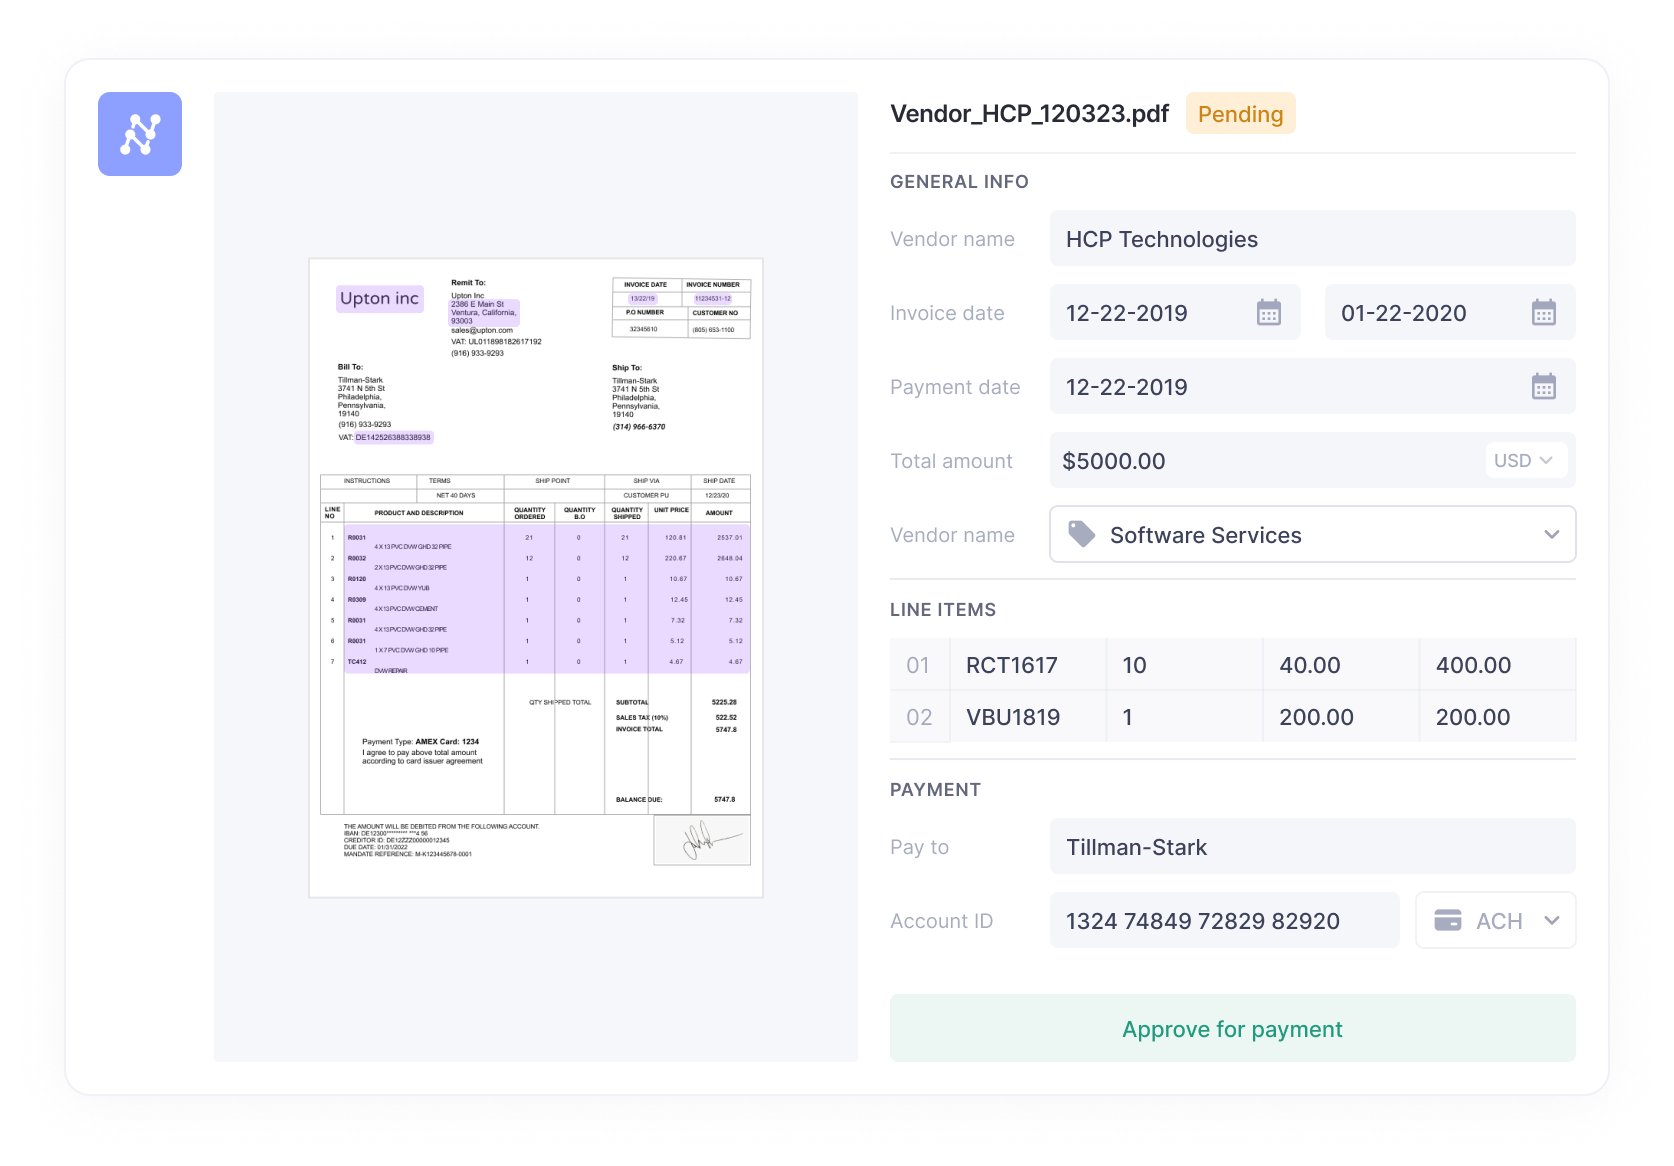 Business process automation using AI and OCR to streamline invoice processing